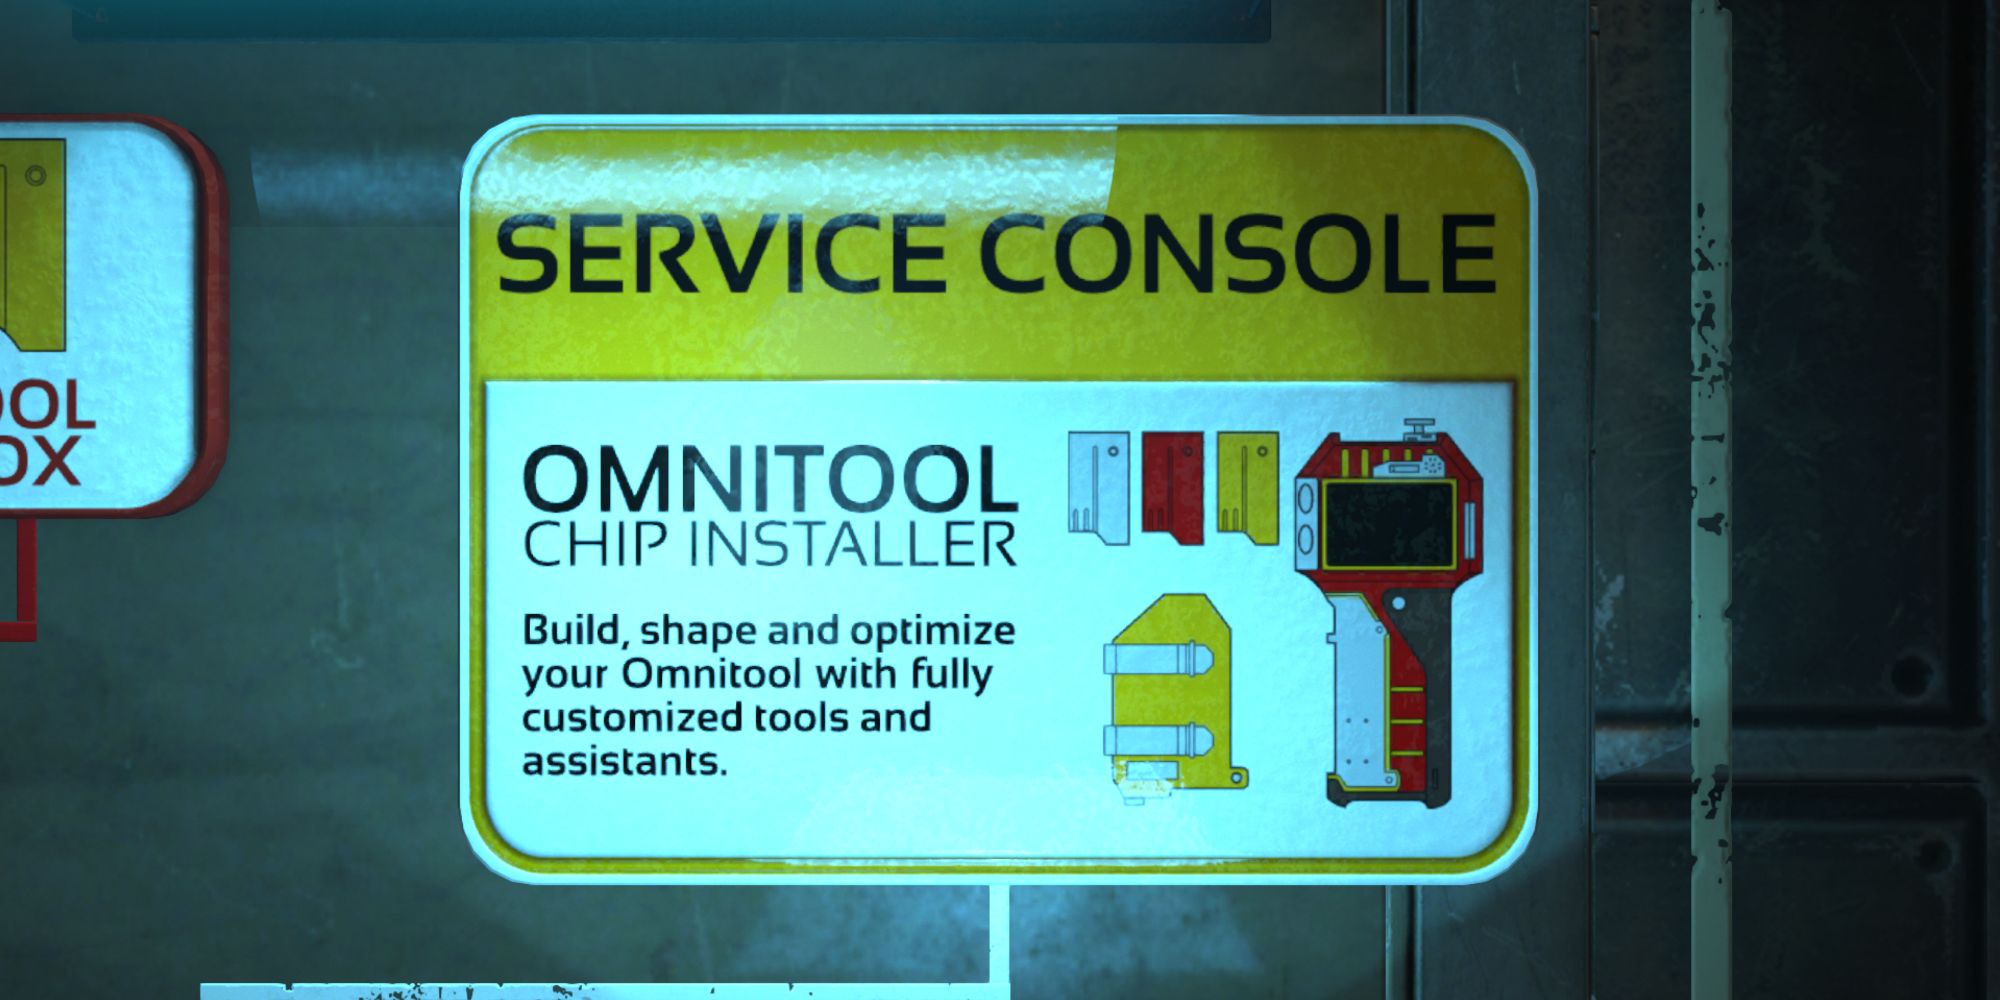 the omnitool service sign in Soma